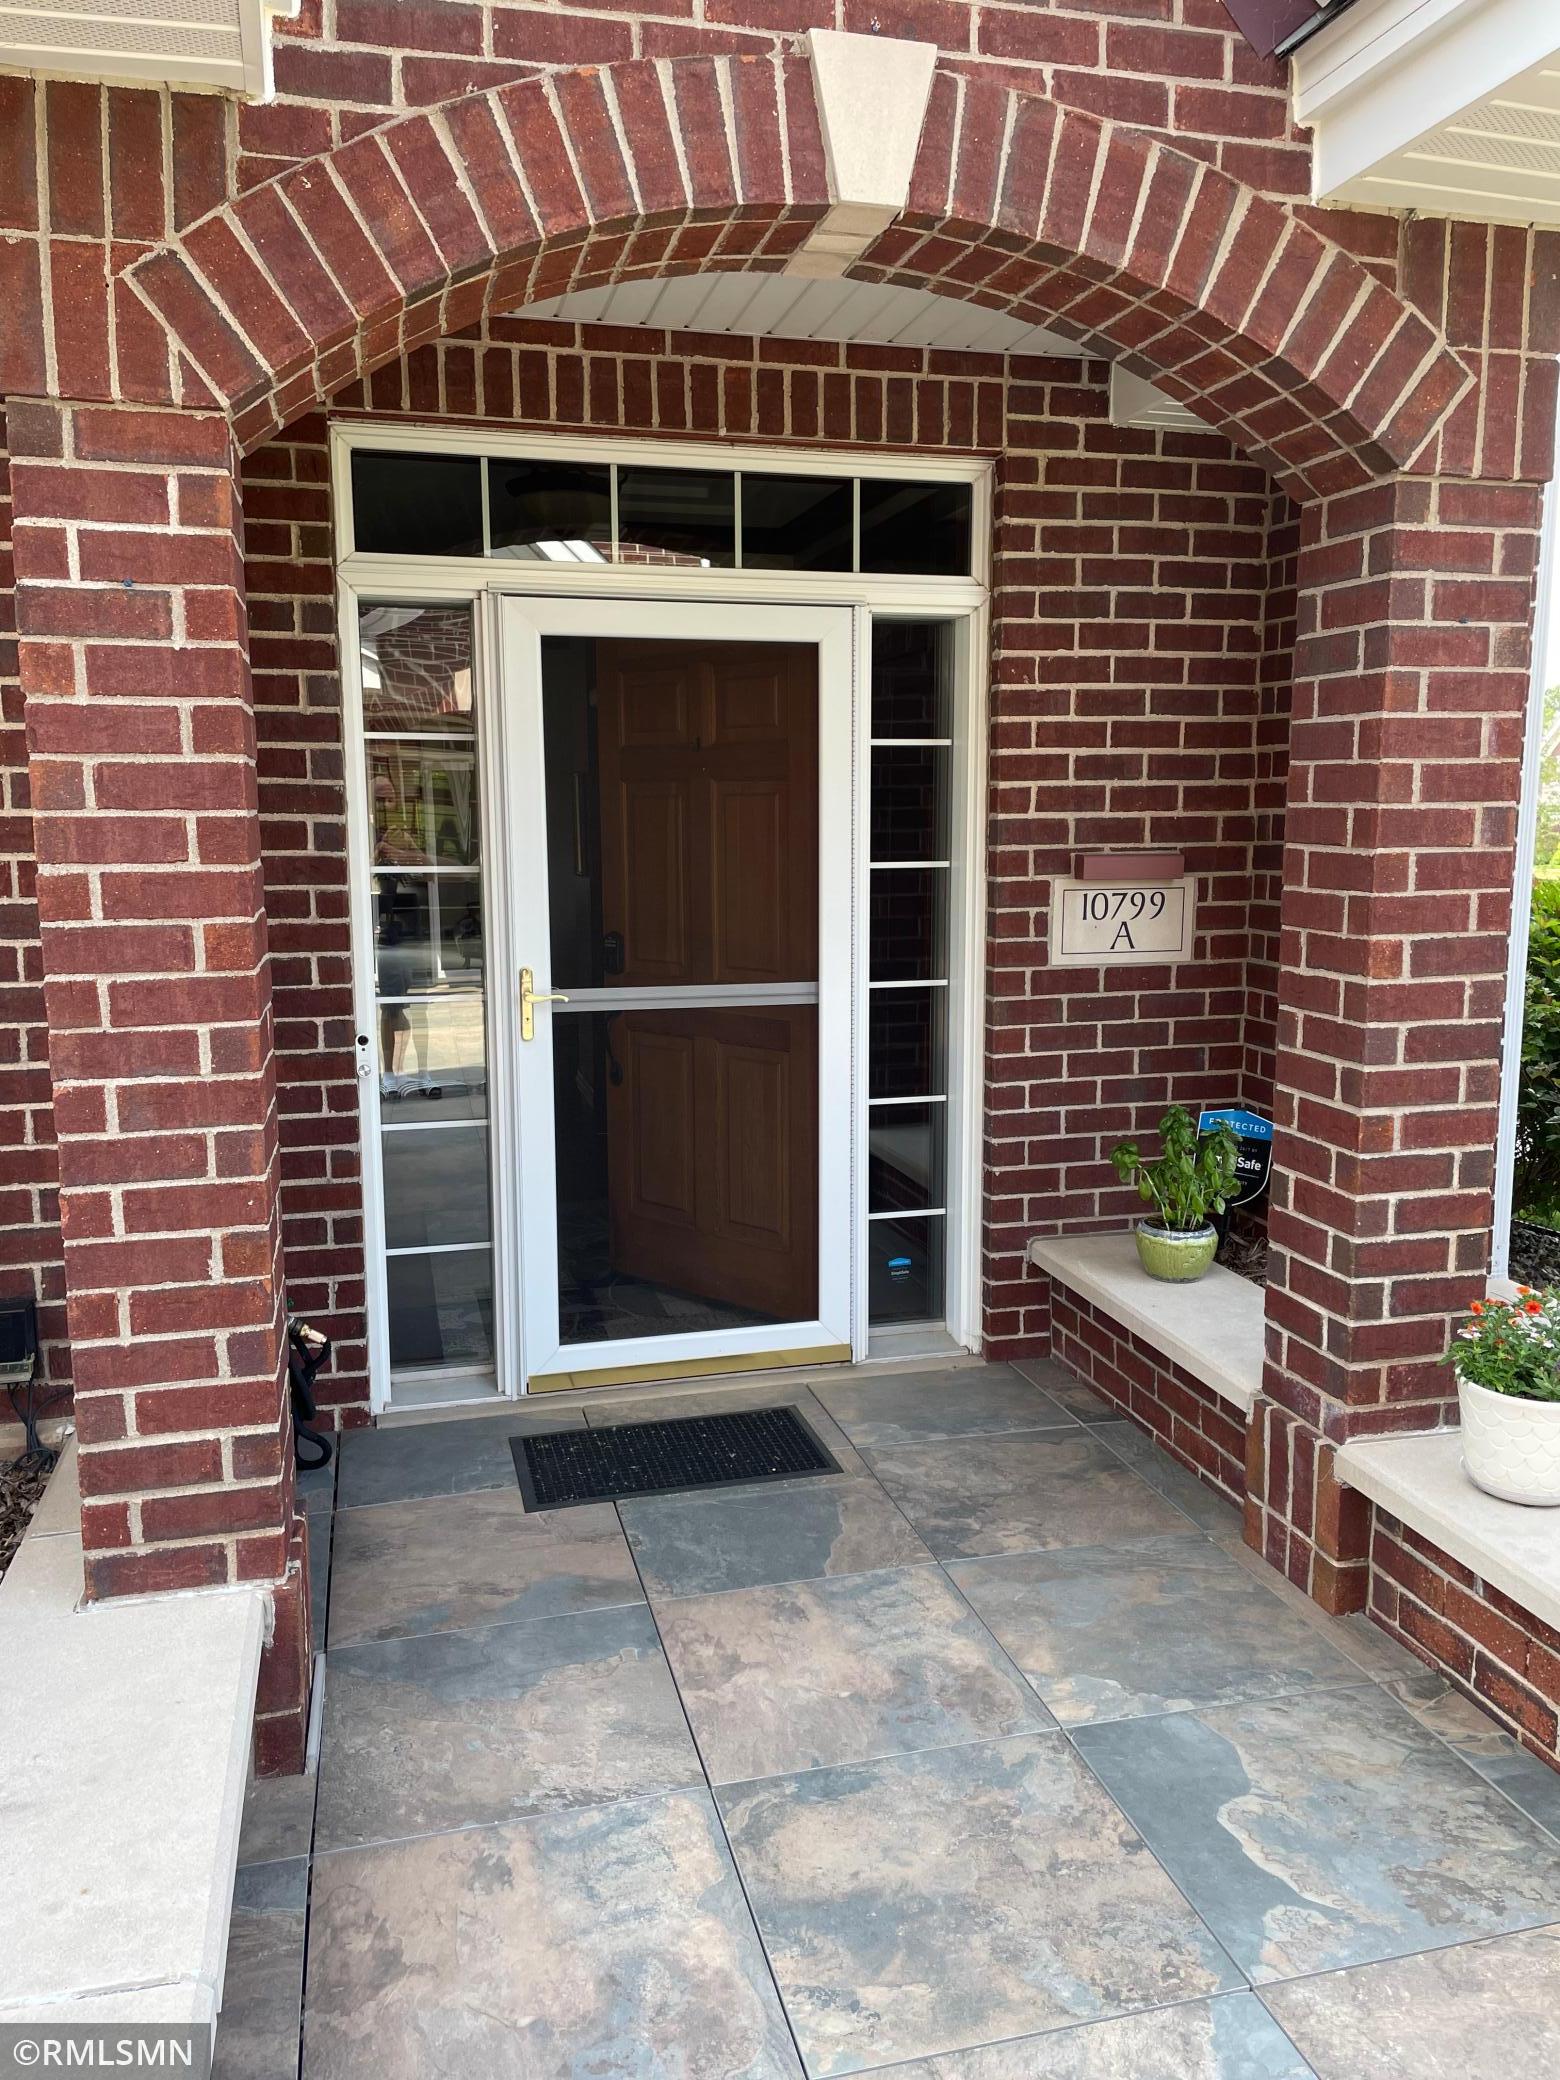 Welcome home to 10799 A, beautiful red brick arch welcomes you and your guests to your home.